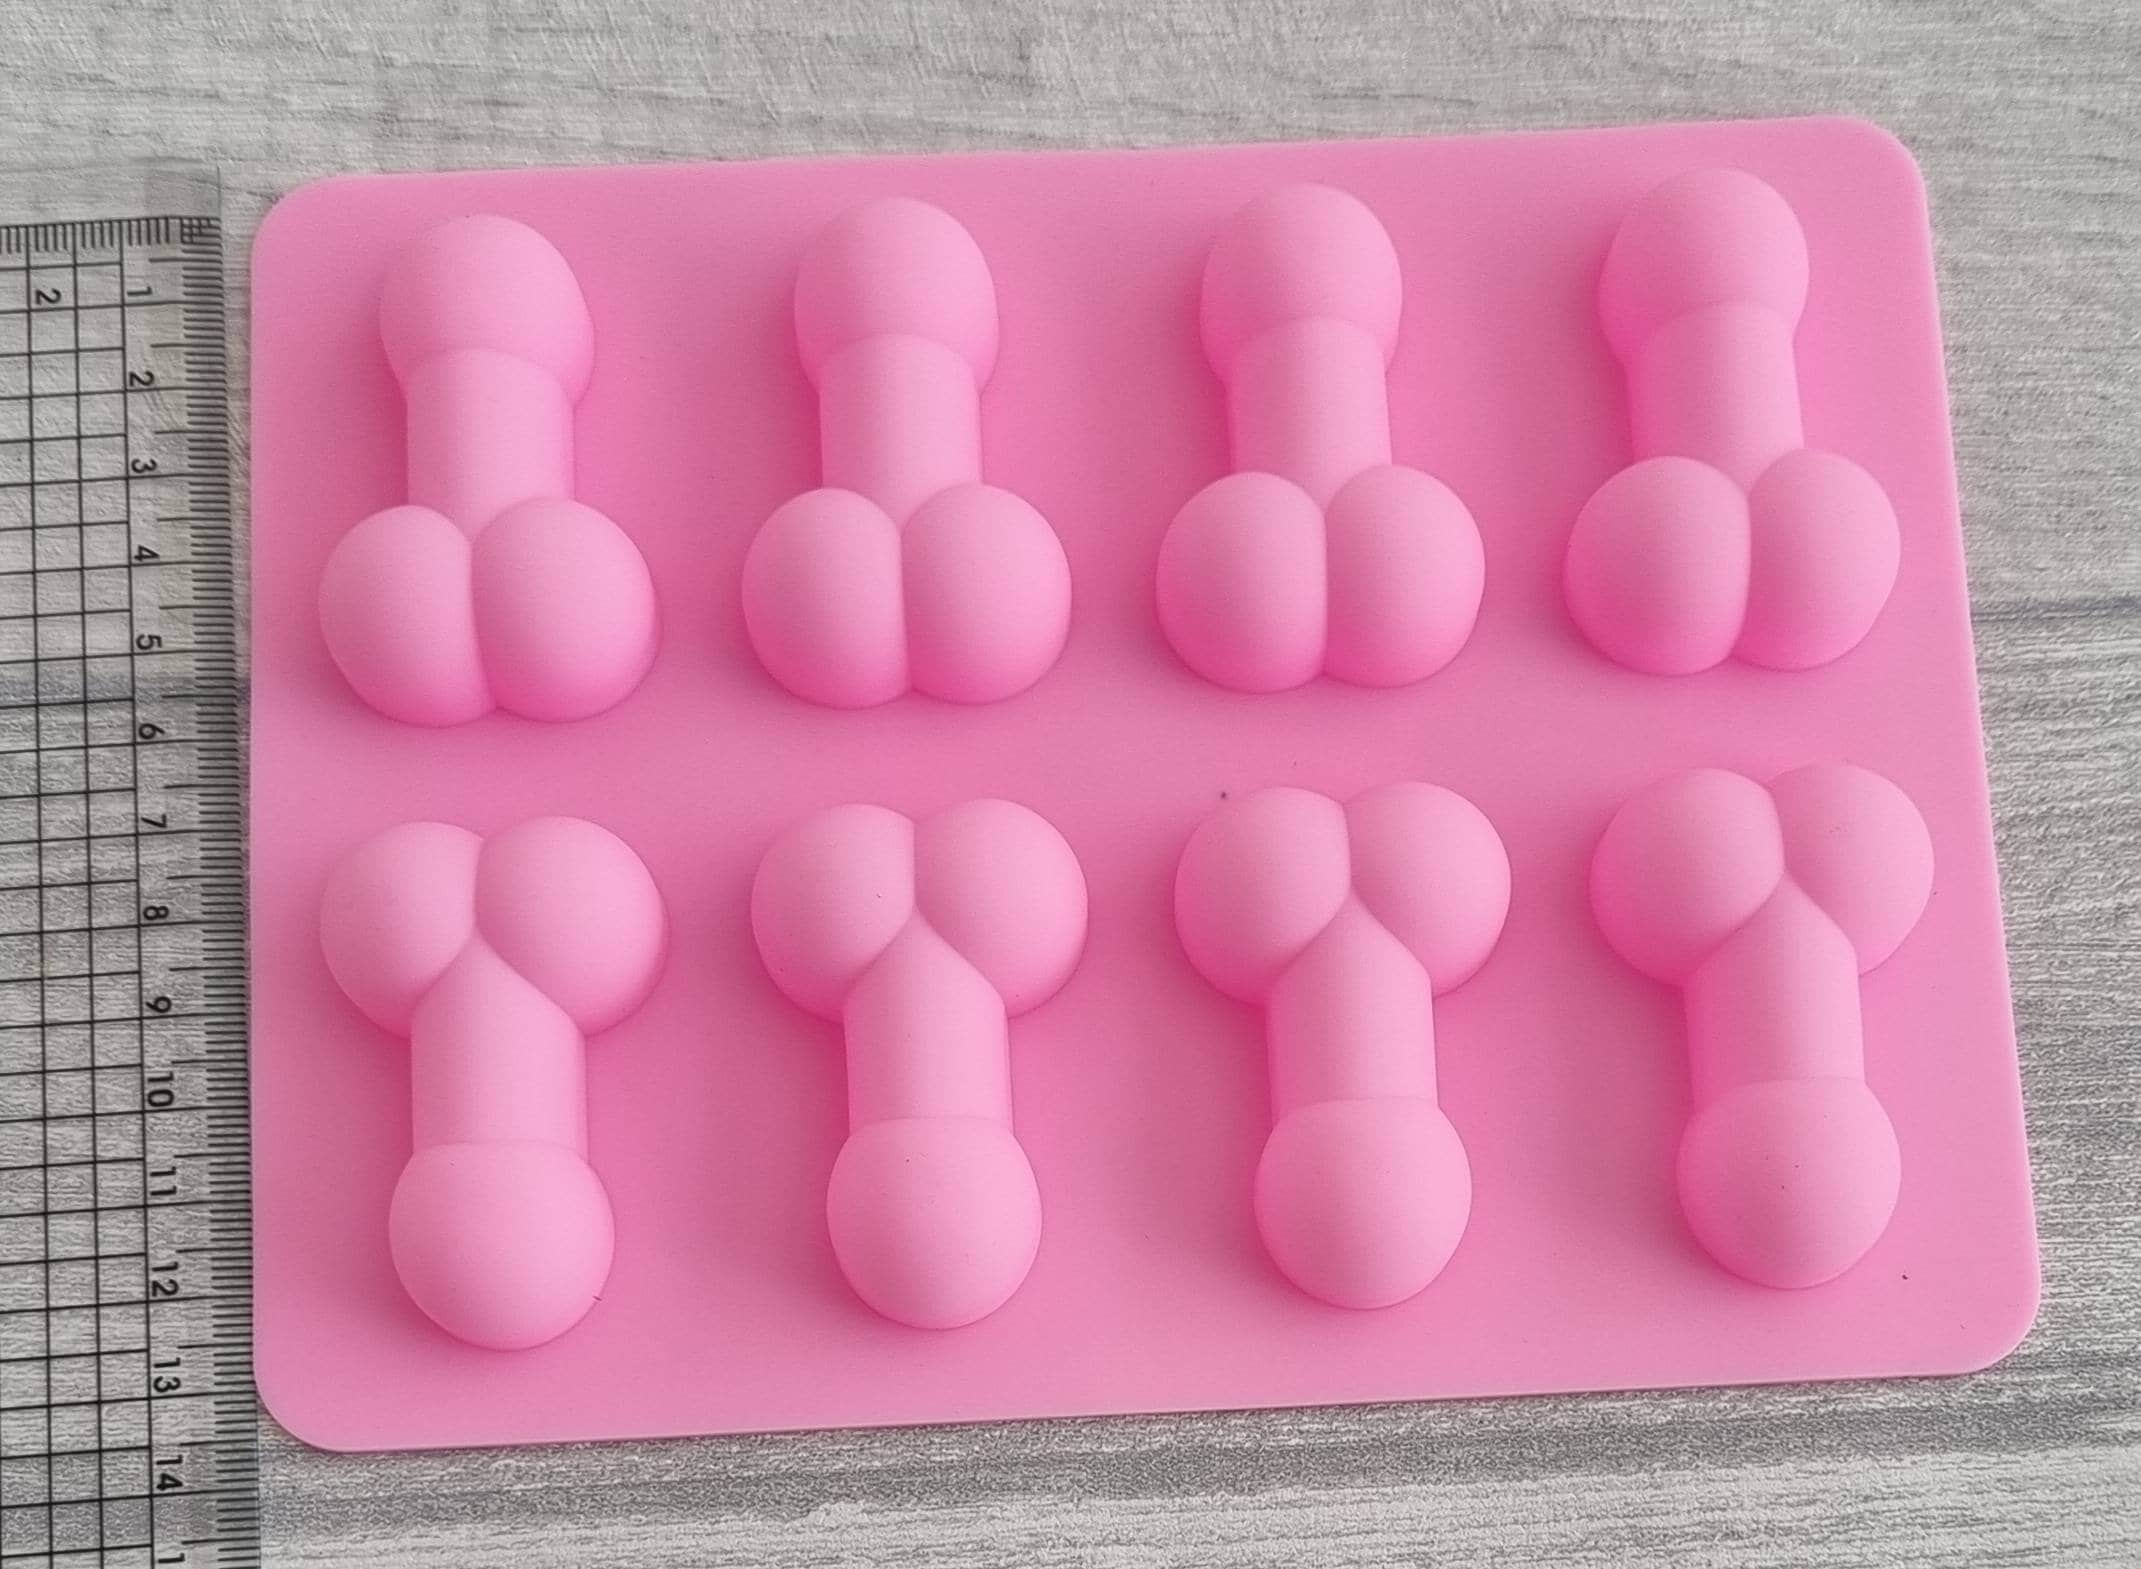 Willy Penis Silicone Chocolate Ice Jelly Cake Mould Mold Mens Party FUN